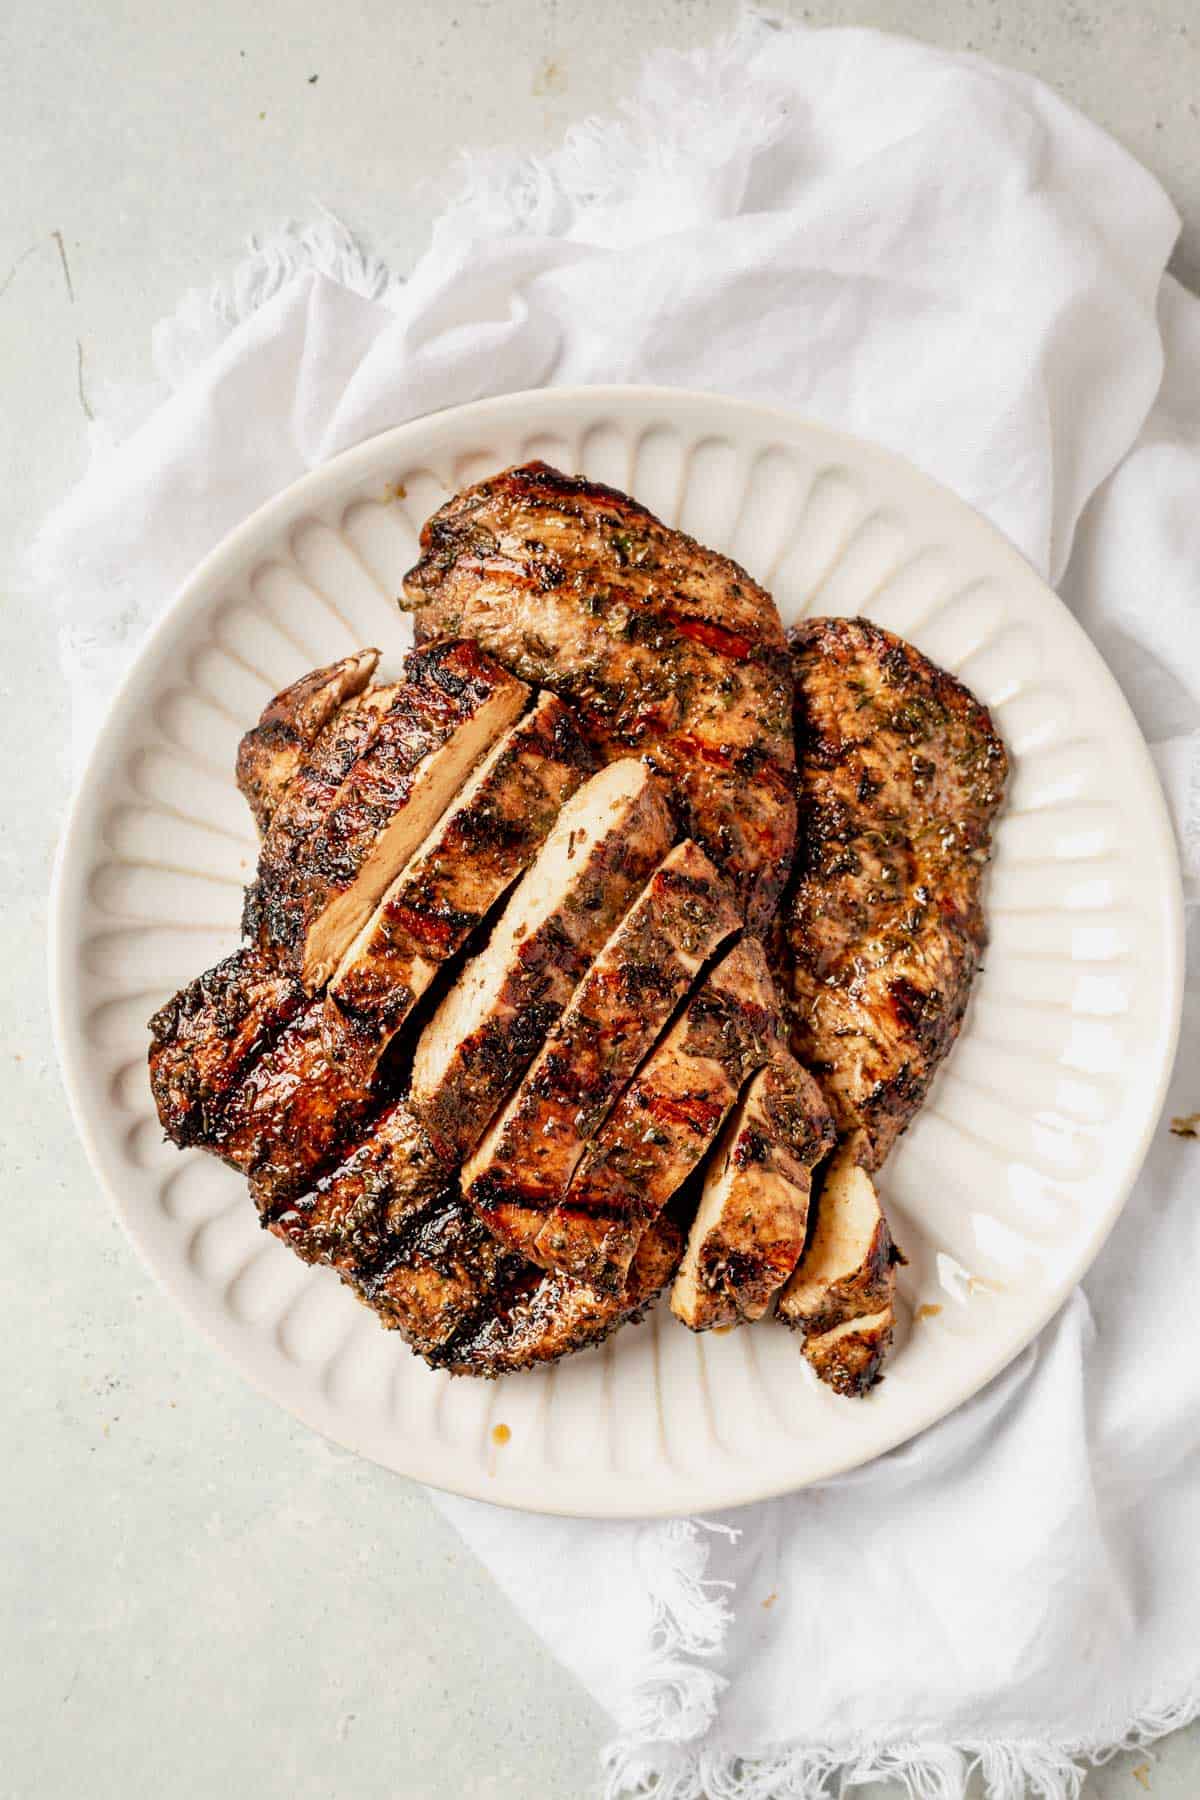 sliced and grilled chicken breast on a serving plate